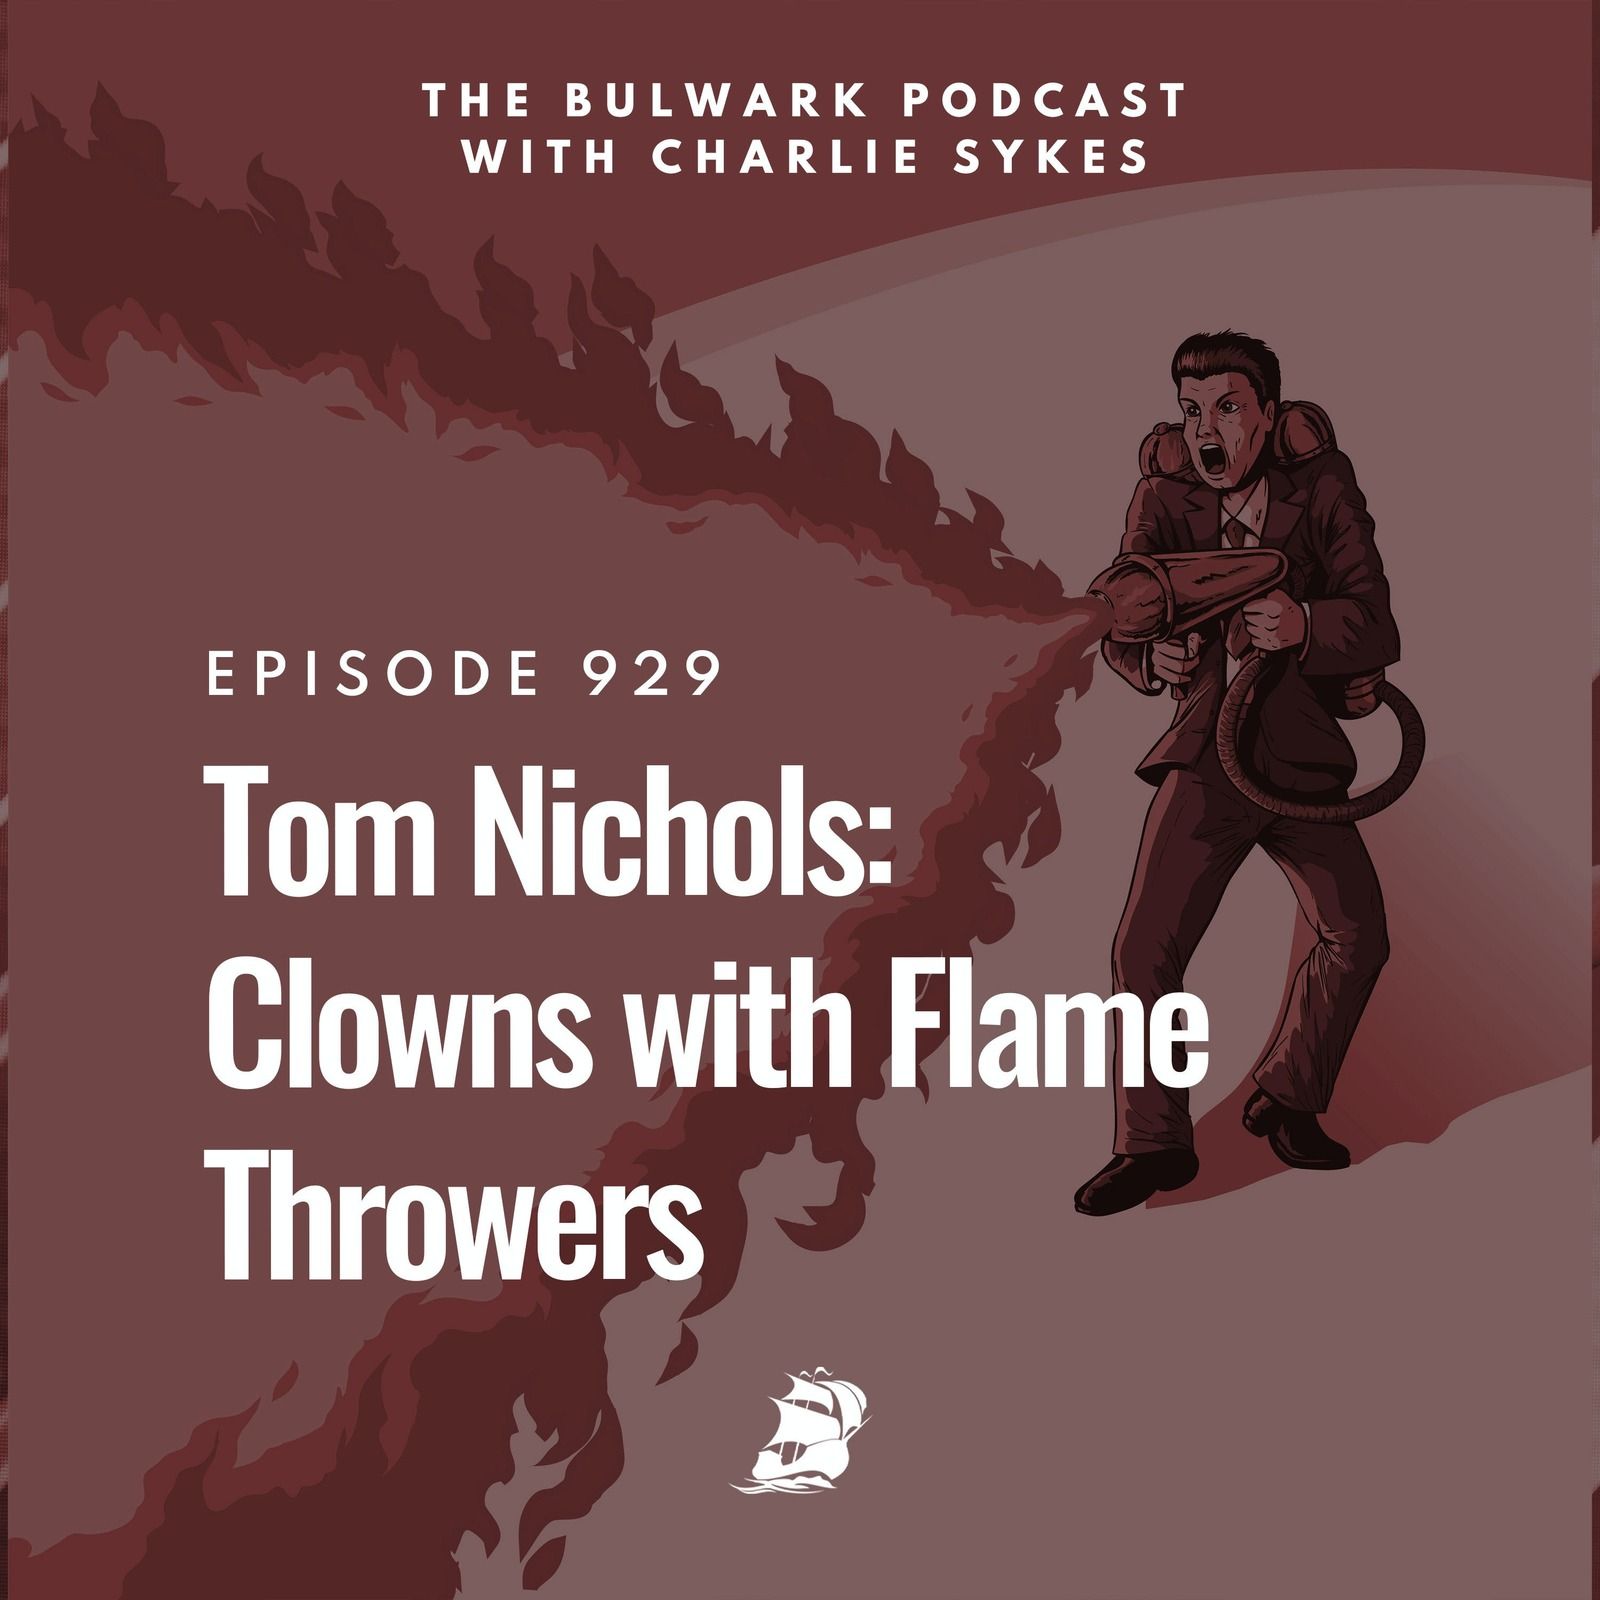 Tom Nichols: Clowns with Flame Throwers